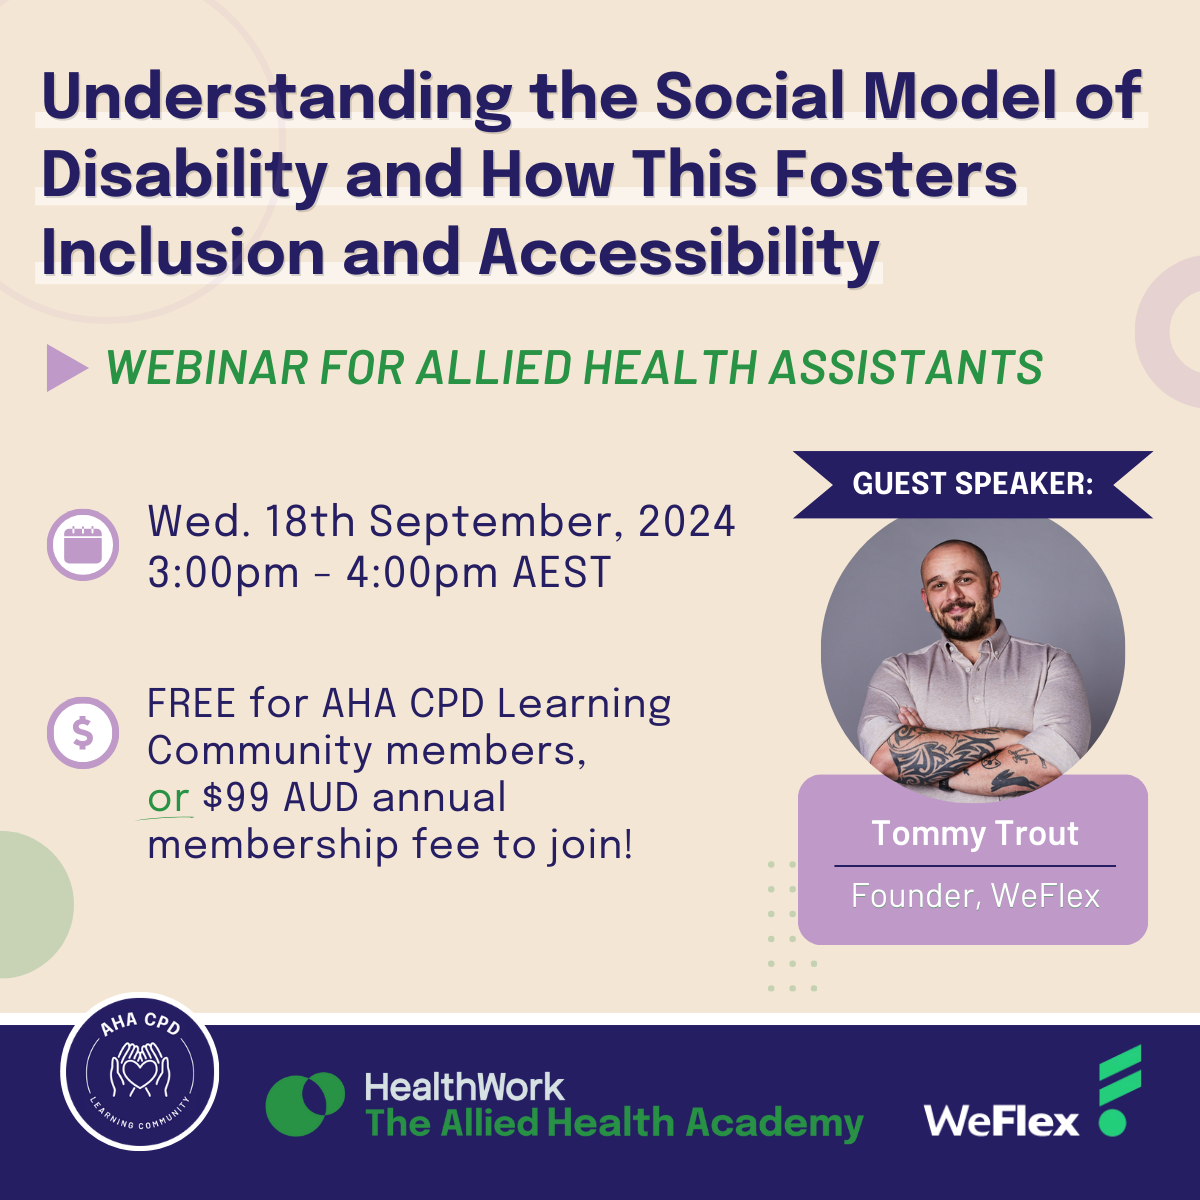 Understanding the Social Model of Disability and How this Fosters Inclusion and Accessibility - CPD Webinar for Allied Health Assistants